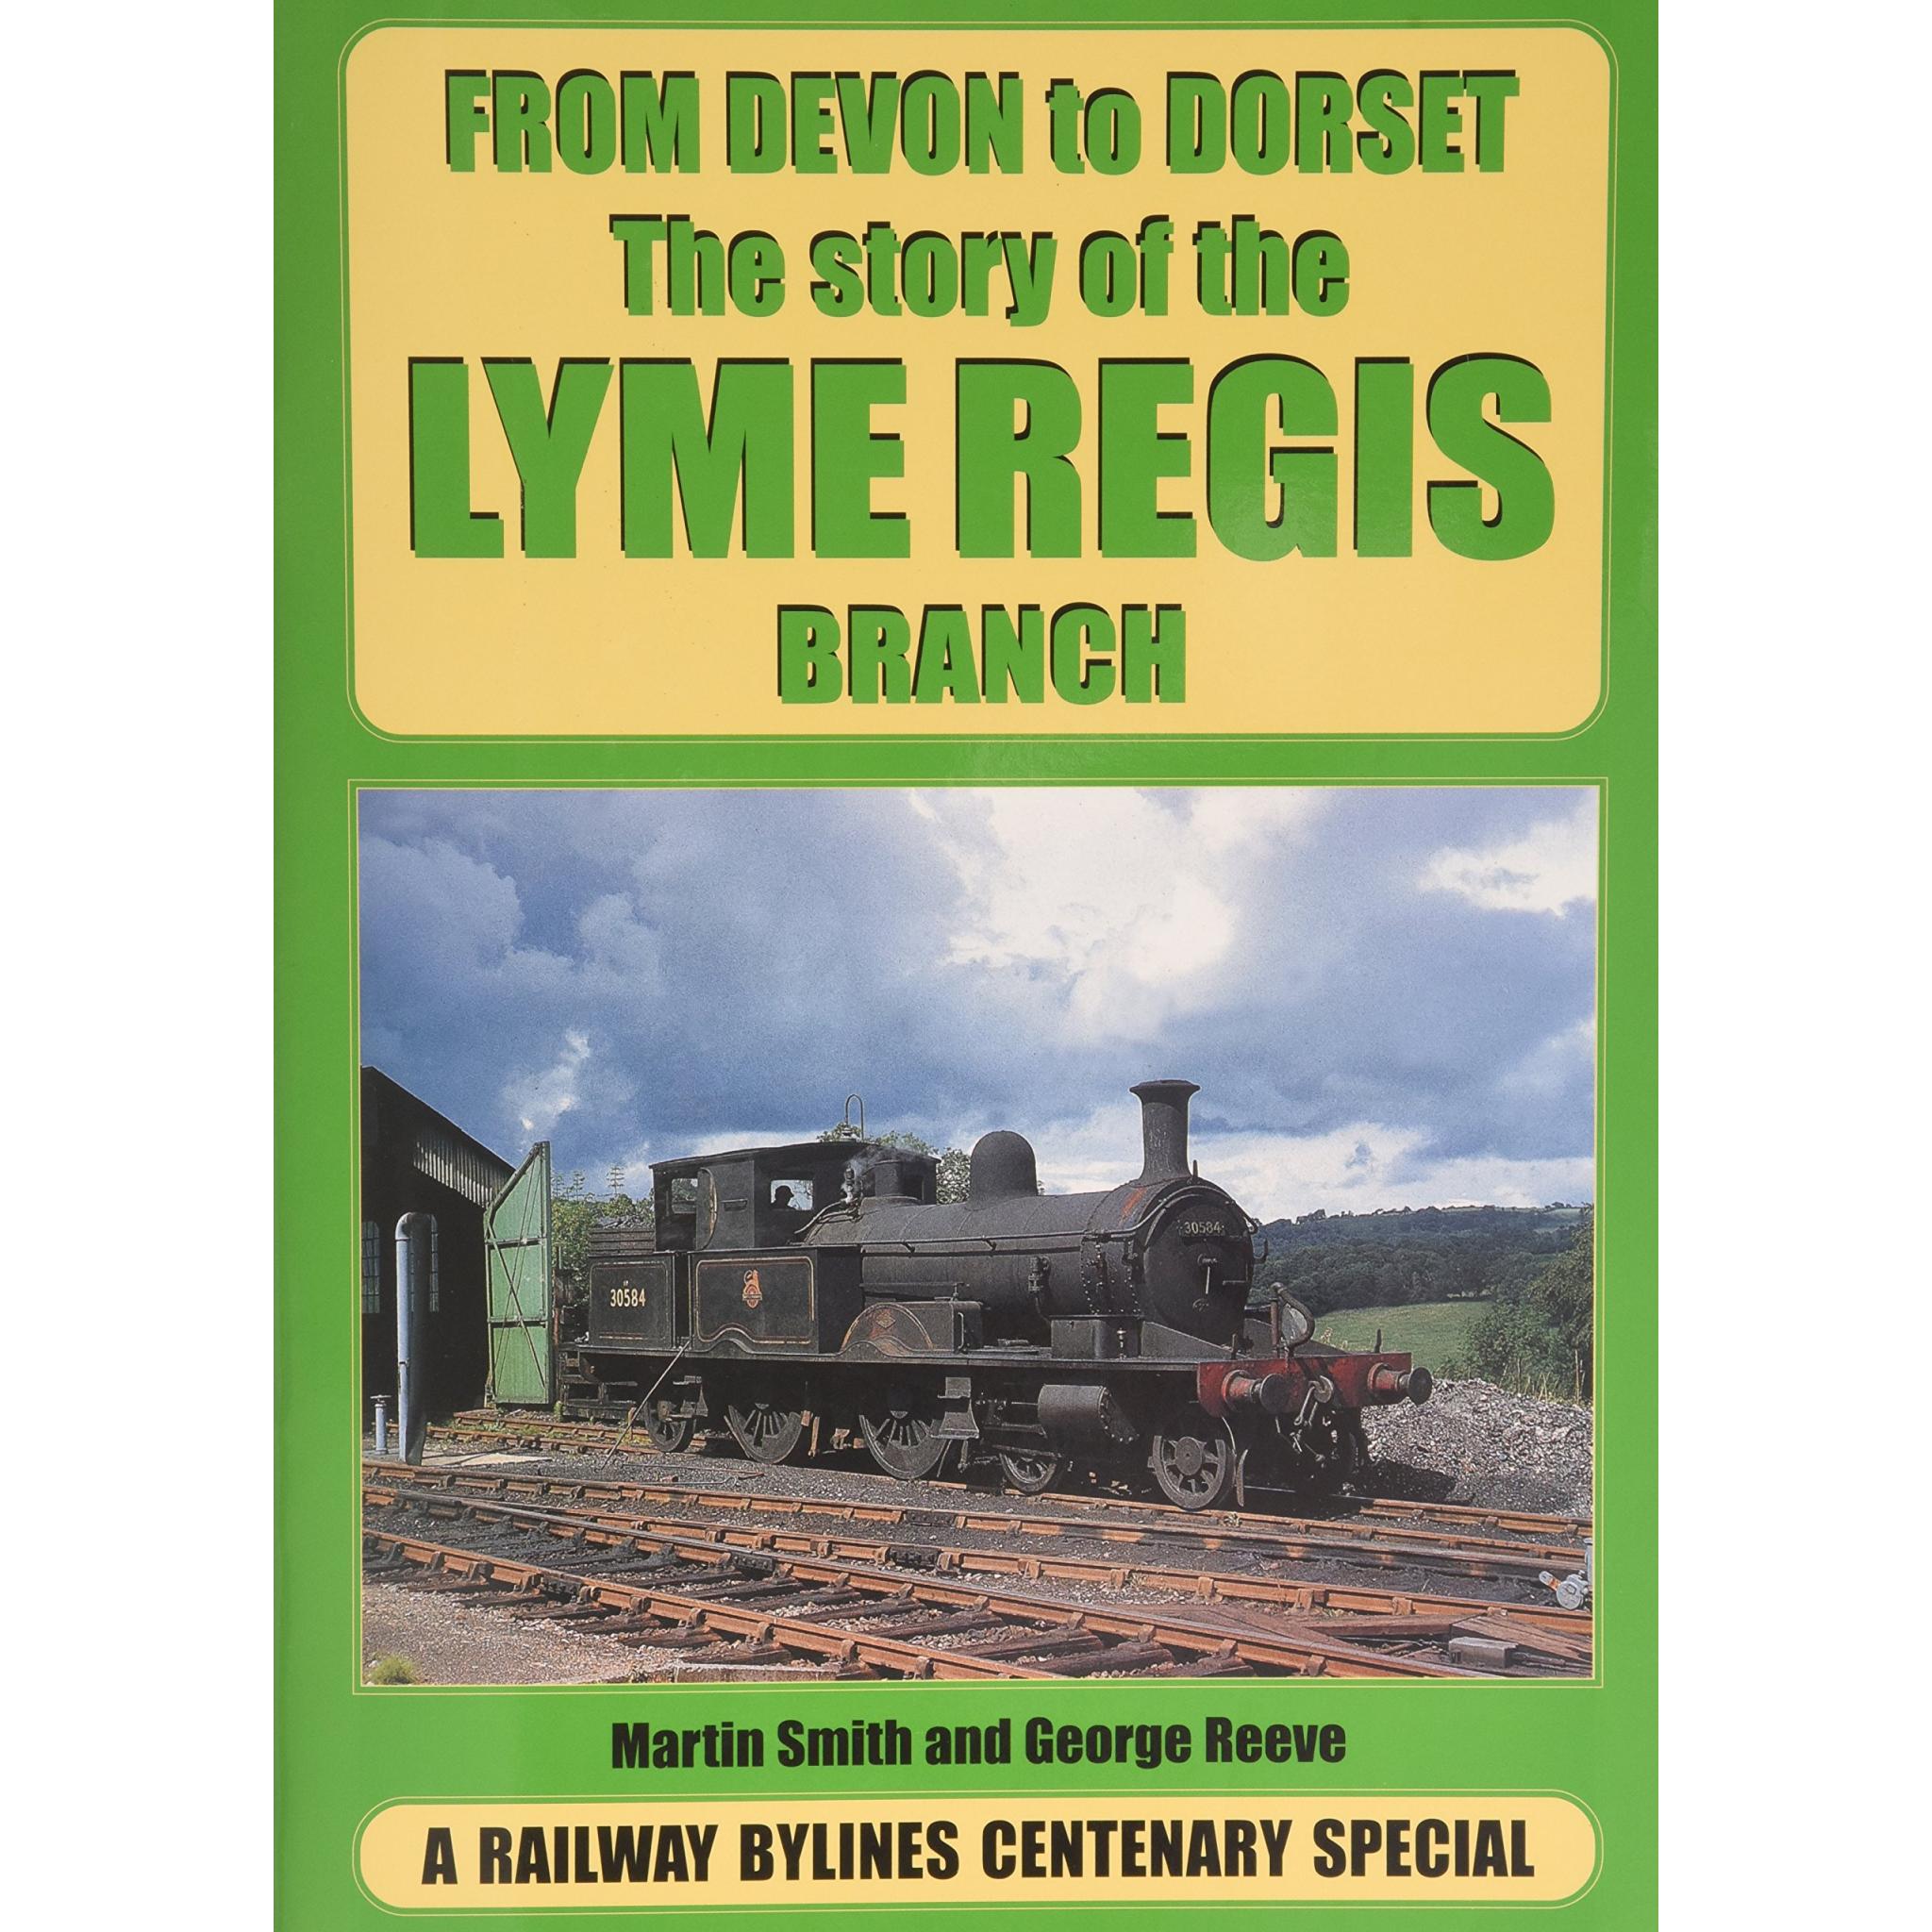 From Devon to Dorset - The story of the LYME REGIS BRANCH